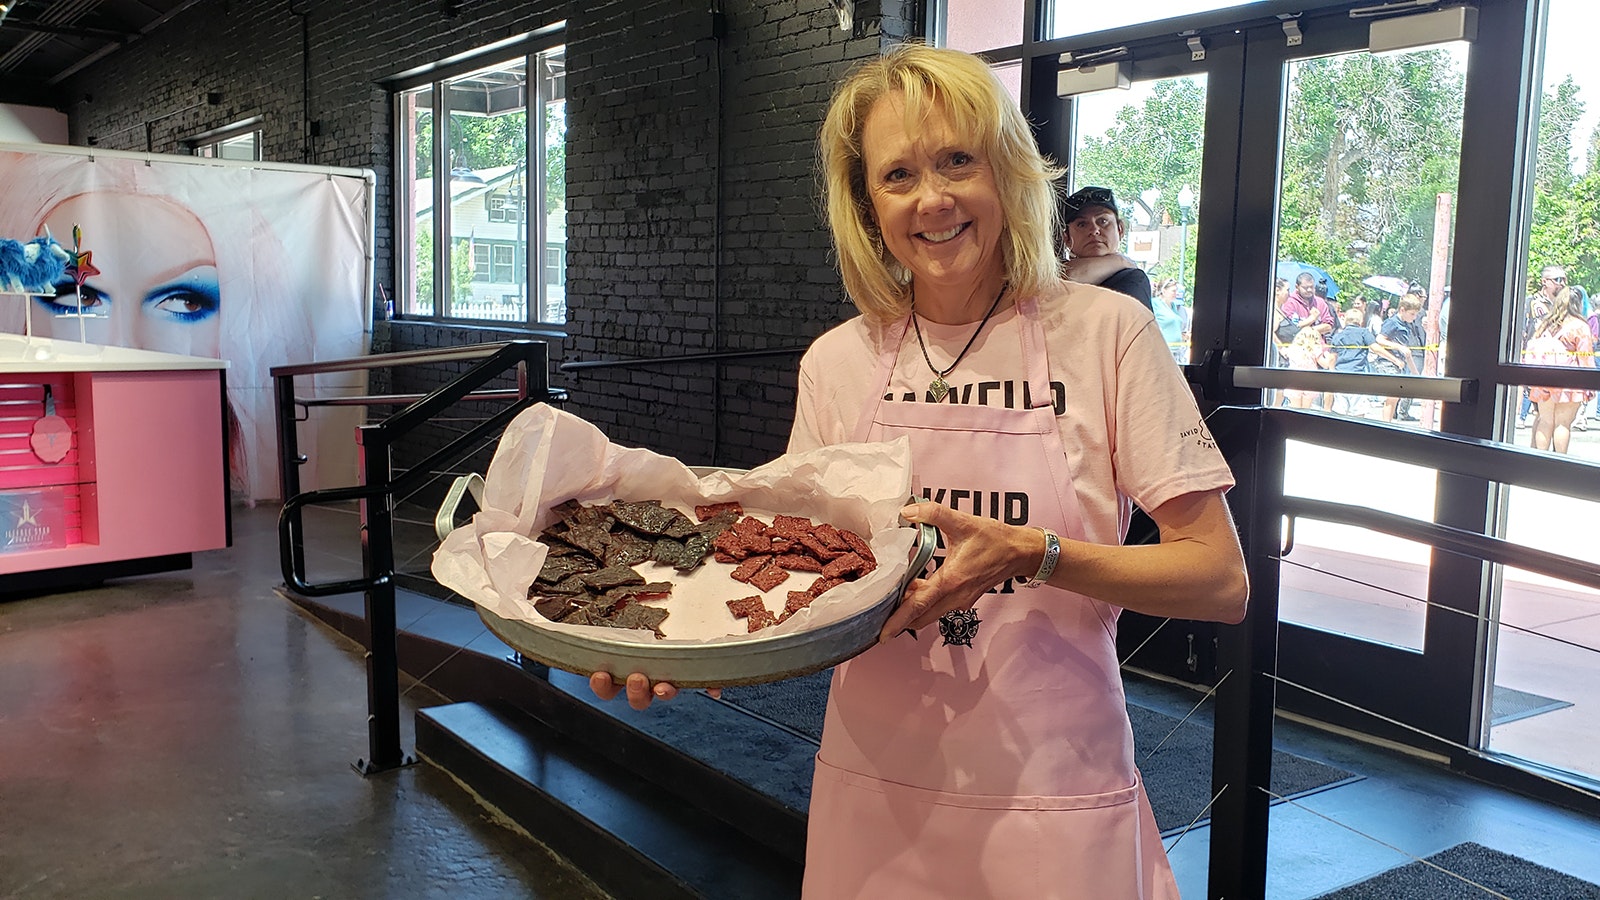 Kim De Vore, CEO of Jonah Bank, was among volunteers helping out at the Jeffree Star store's grand opening. She was serving samples of his ranch's yak meat.